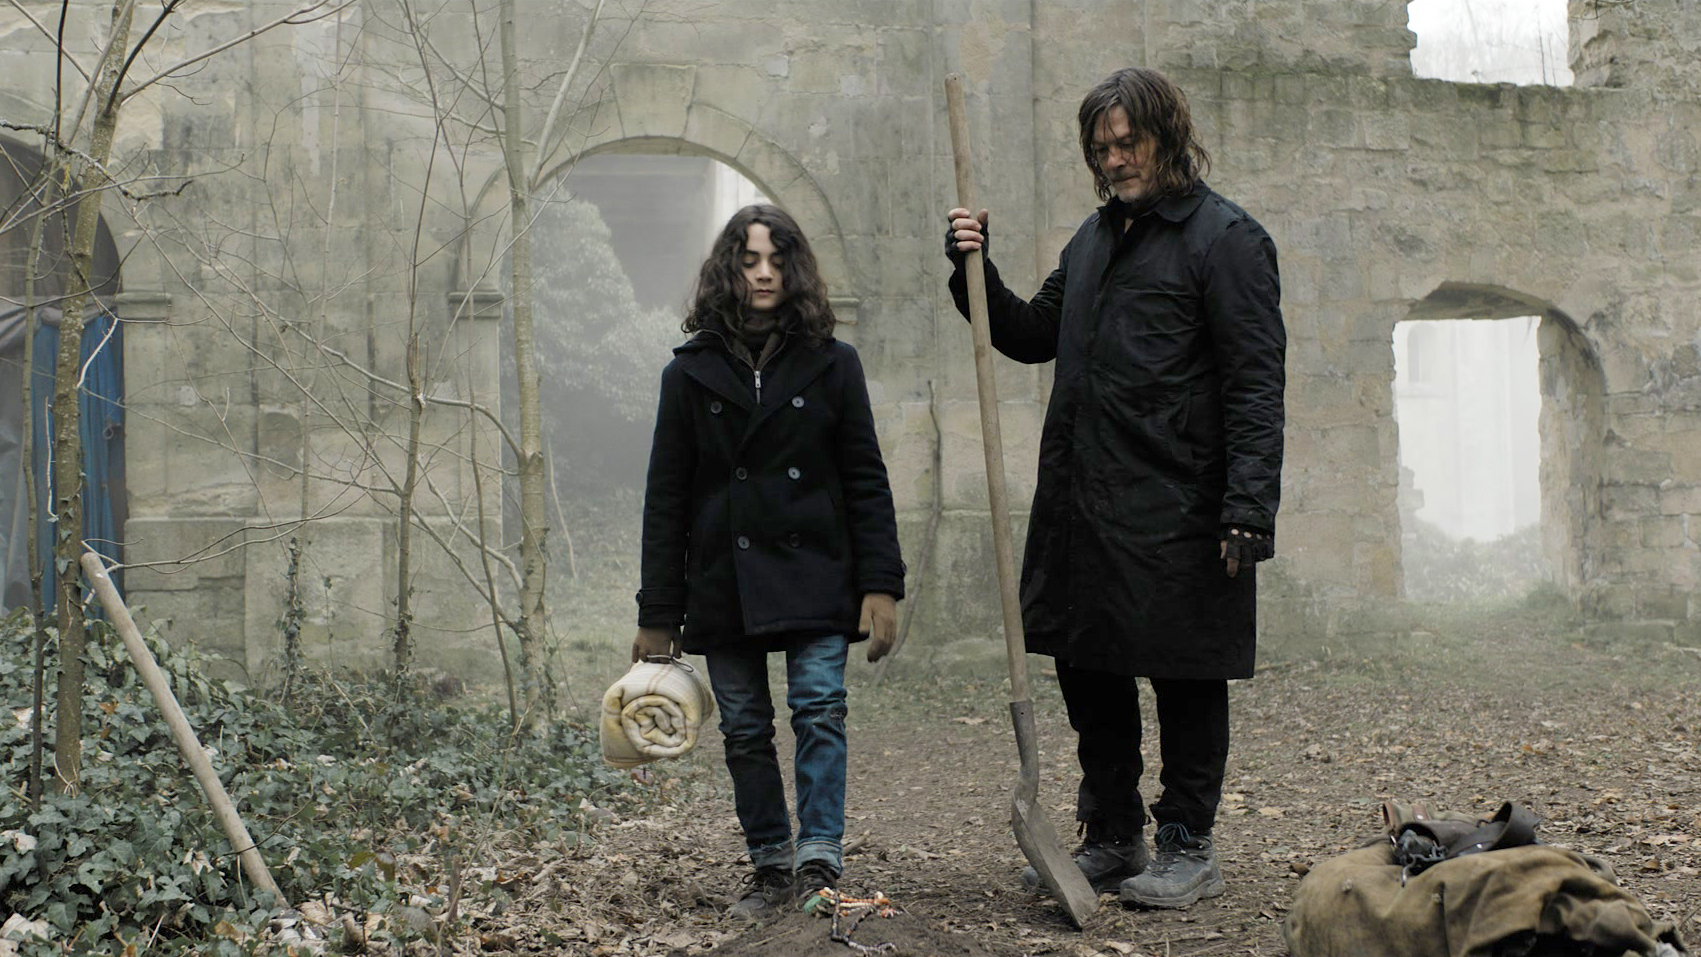 Daryl standing with a young person amid ruins